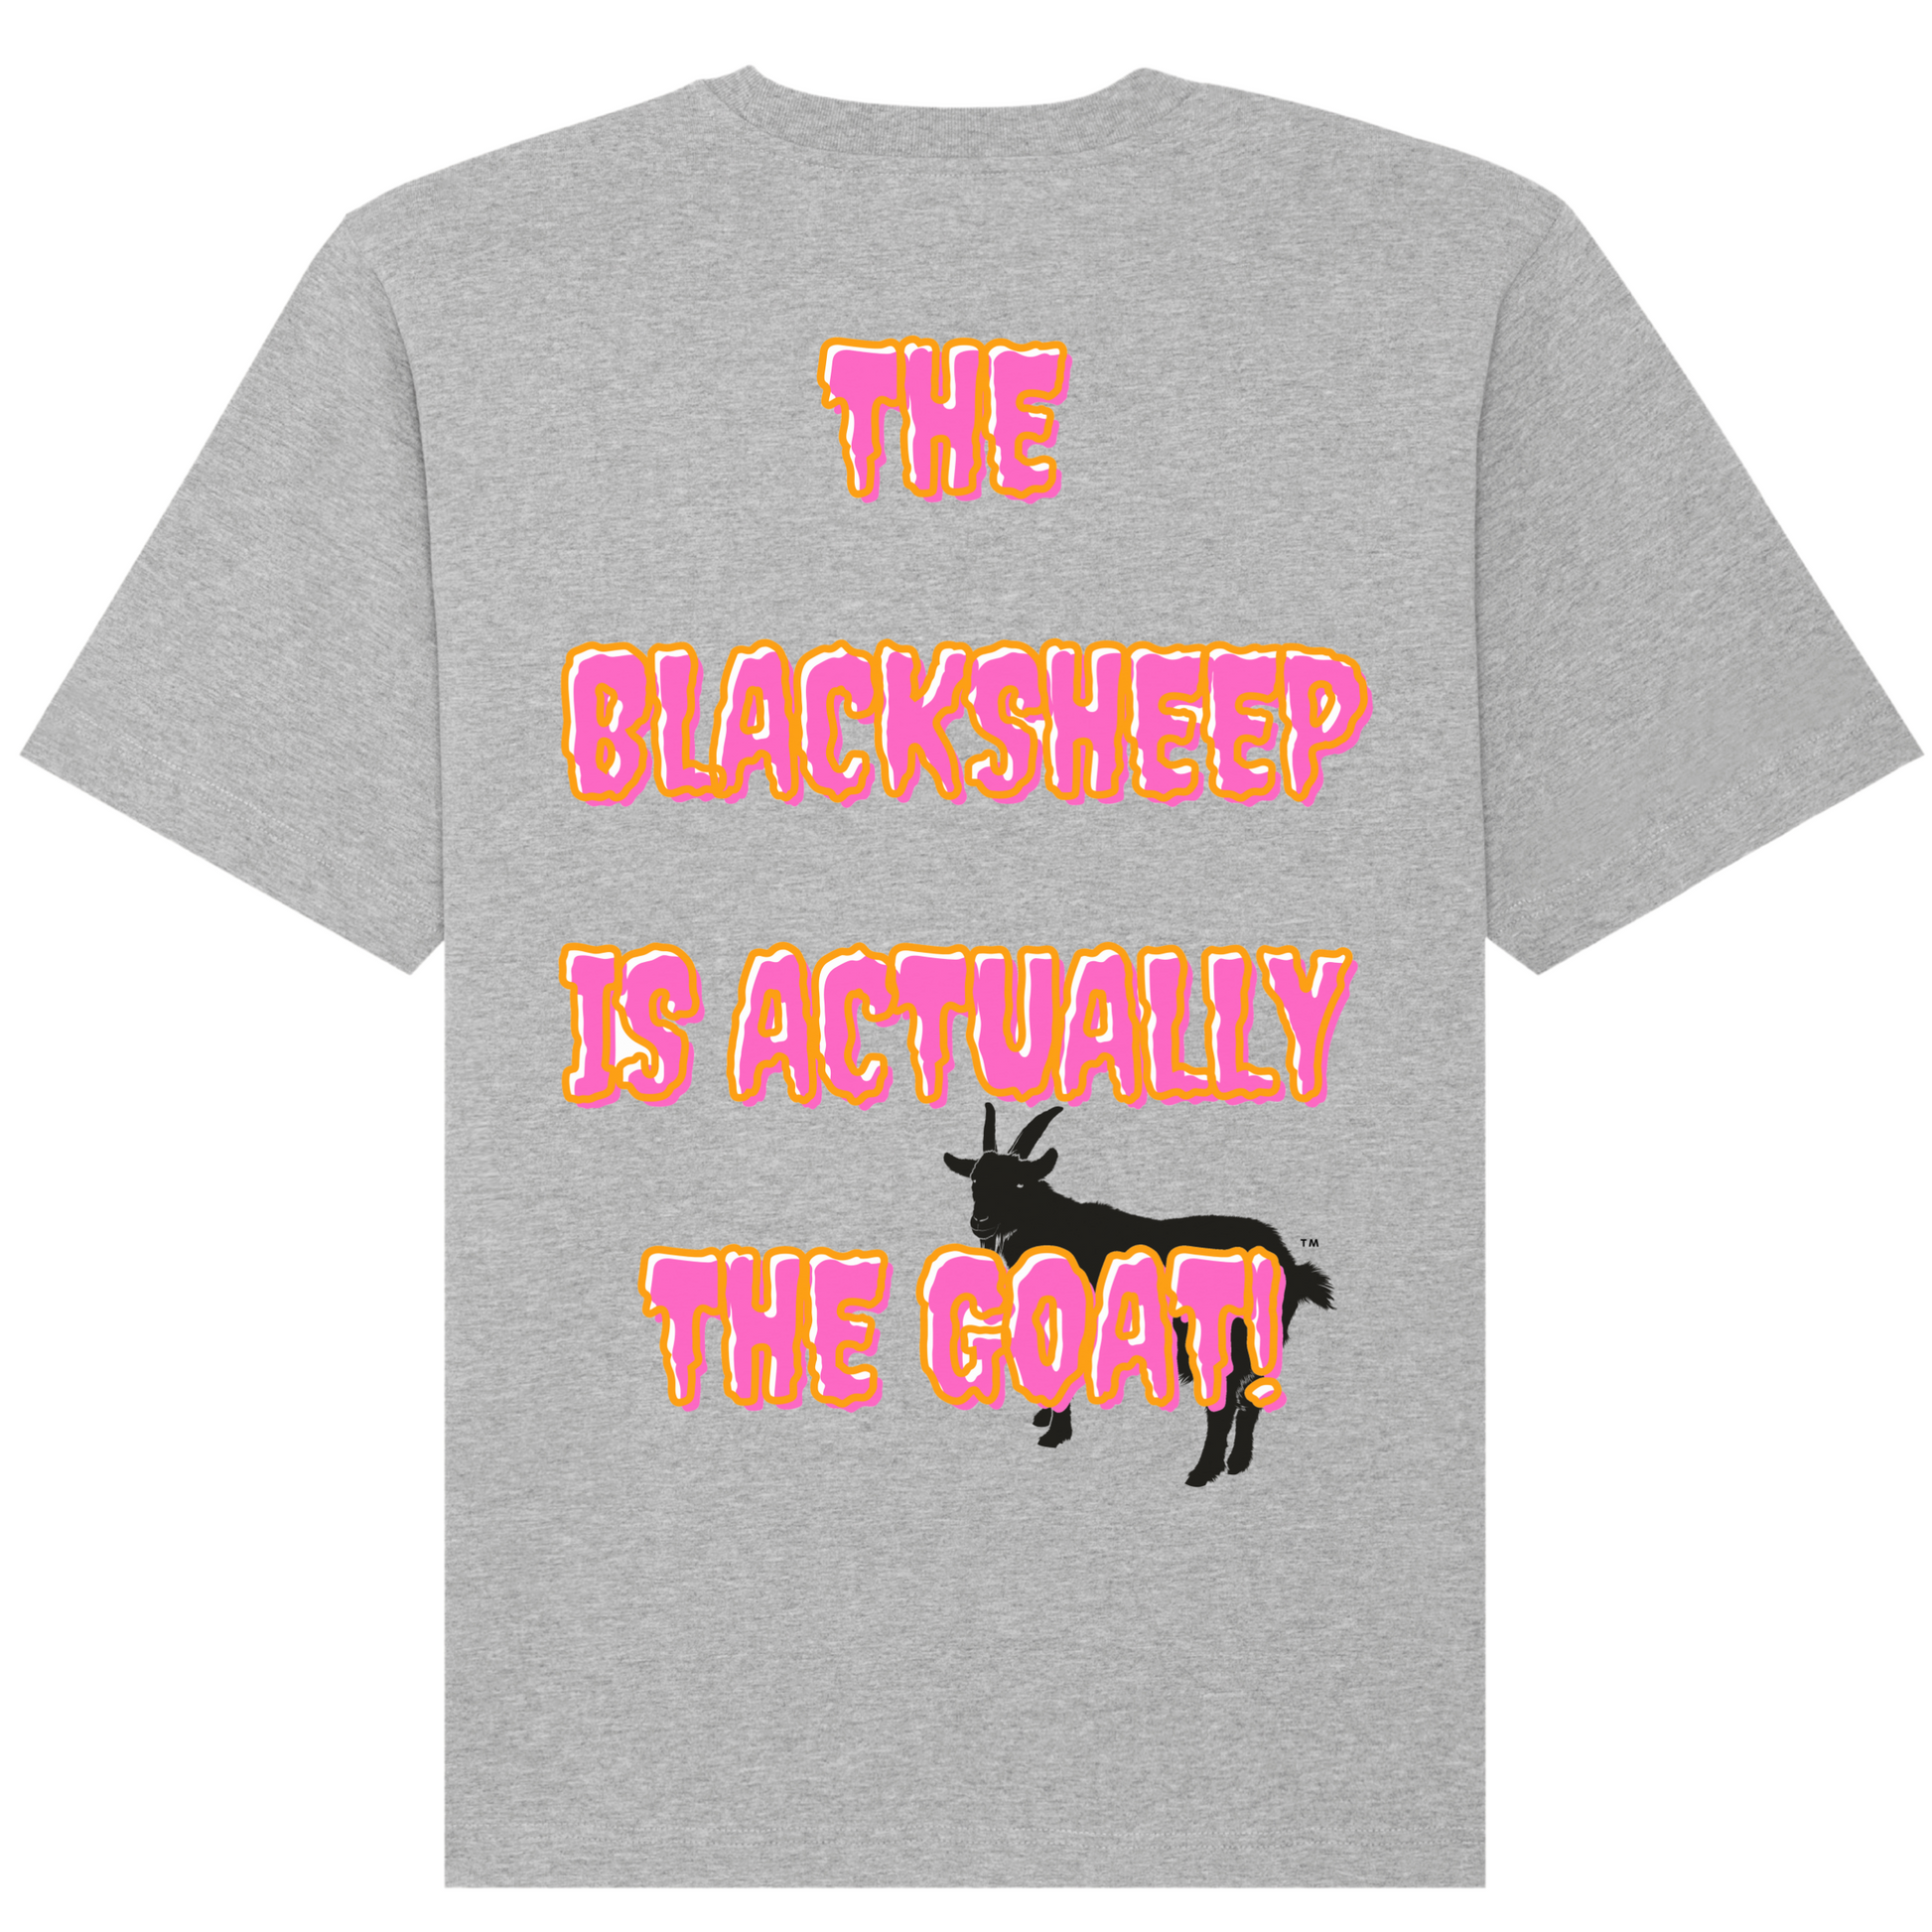 T-Shirt BlackSheep Is Actually The Goat™! This unique piece of fashion celebrates the greatness of an individual who was first refused but has SINCE RISEN to admiration. Crafted with soft, 100% organic cotton, this heather grey Tee provides a relaxed fit and maximum comfort for those who want to be stylish and sustainable! Get yours now from the Blacksheep Society Collection! The Image is showing the Back of the T-Shirt, showing large A3 sized  print, with phrase "The Blacksheep Is Actually the Goat"